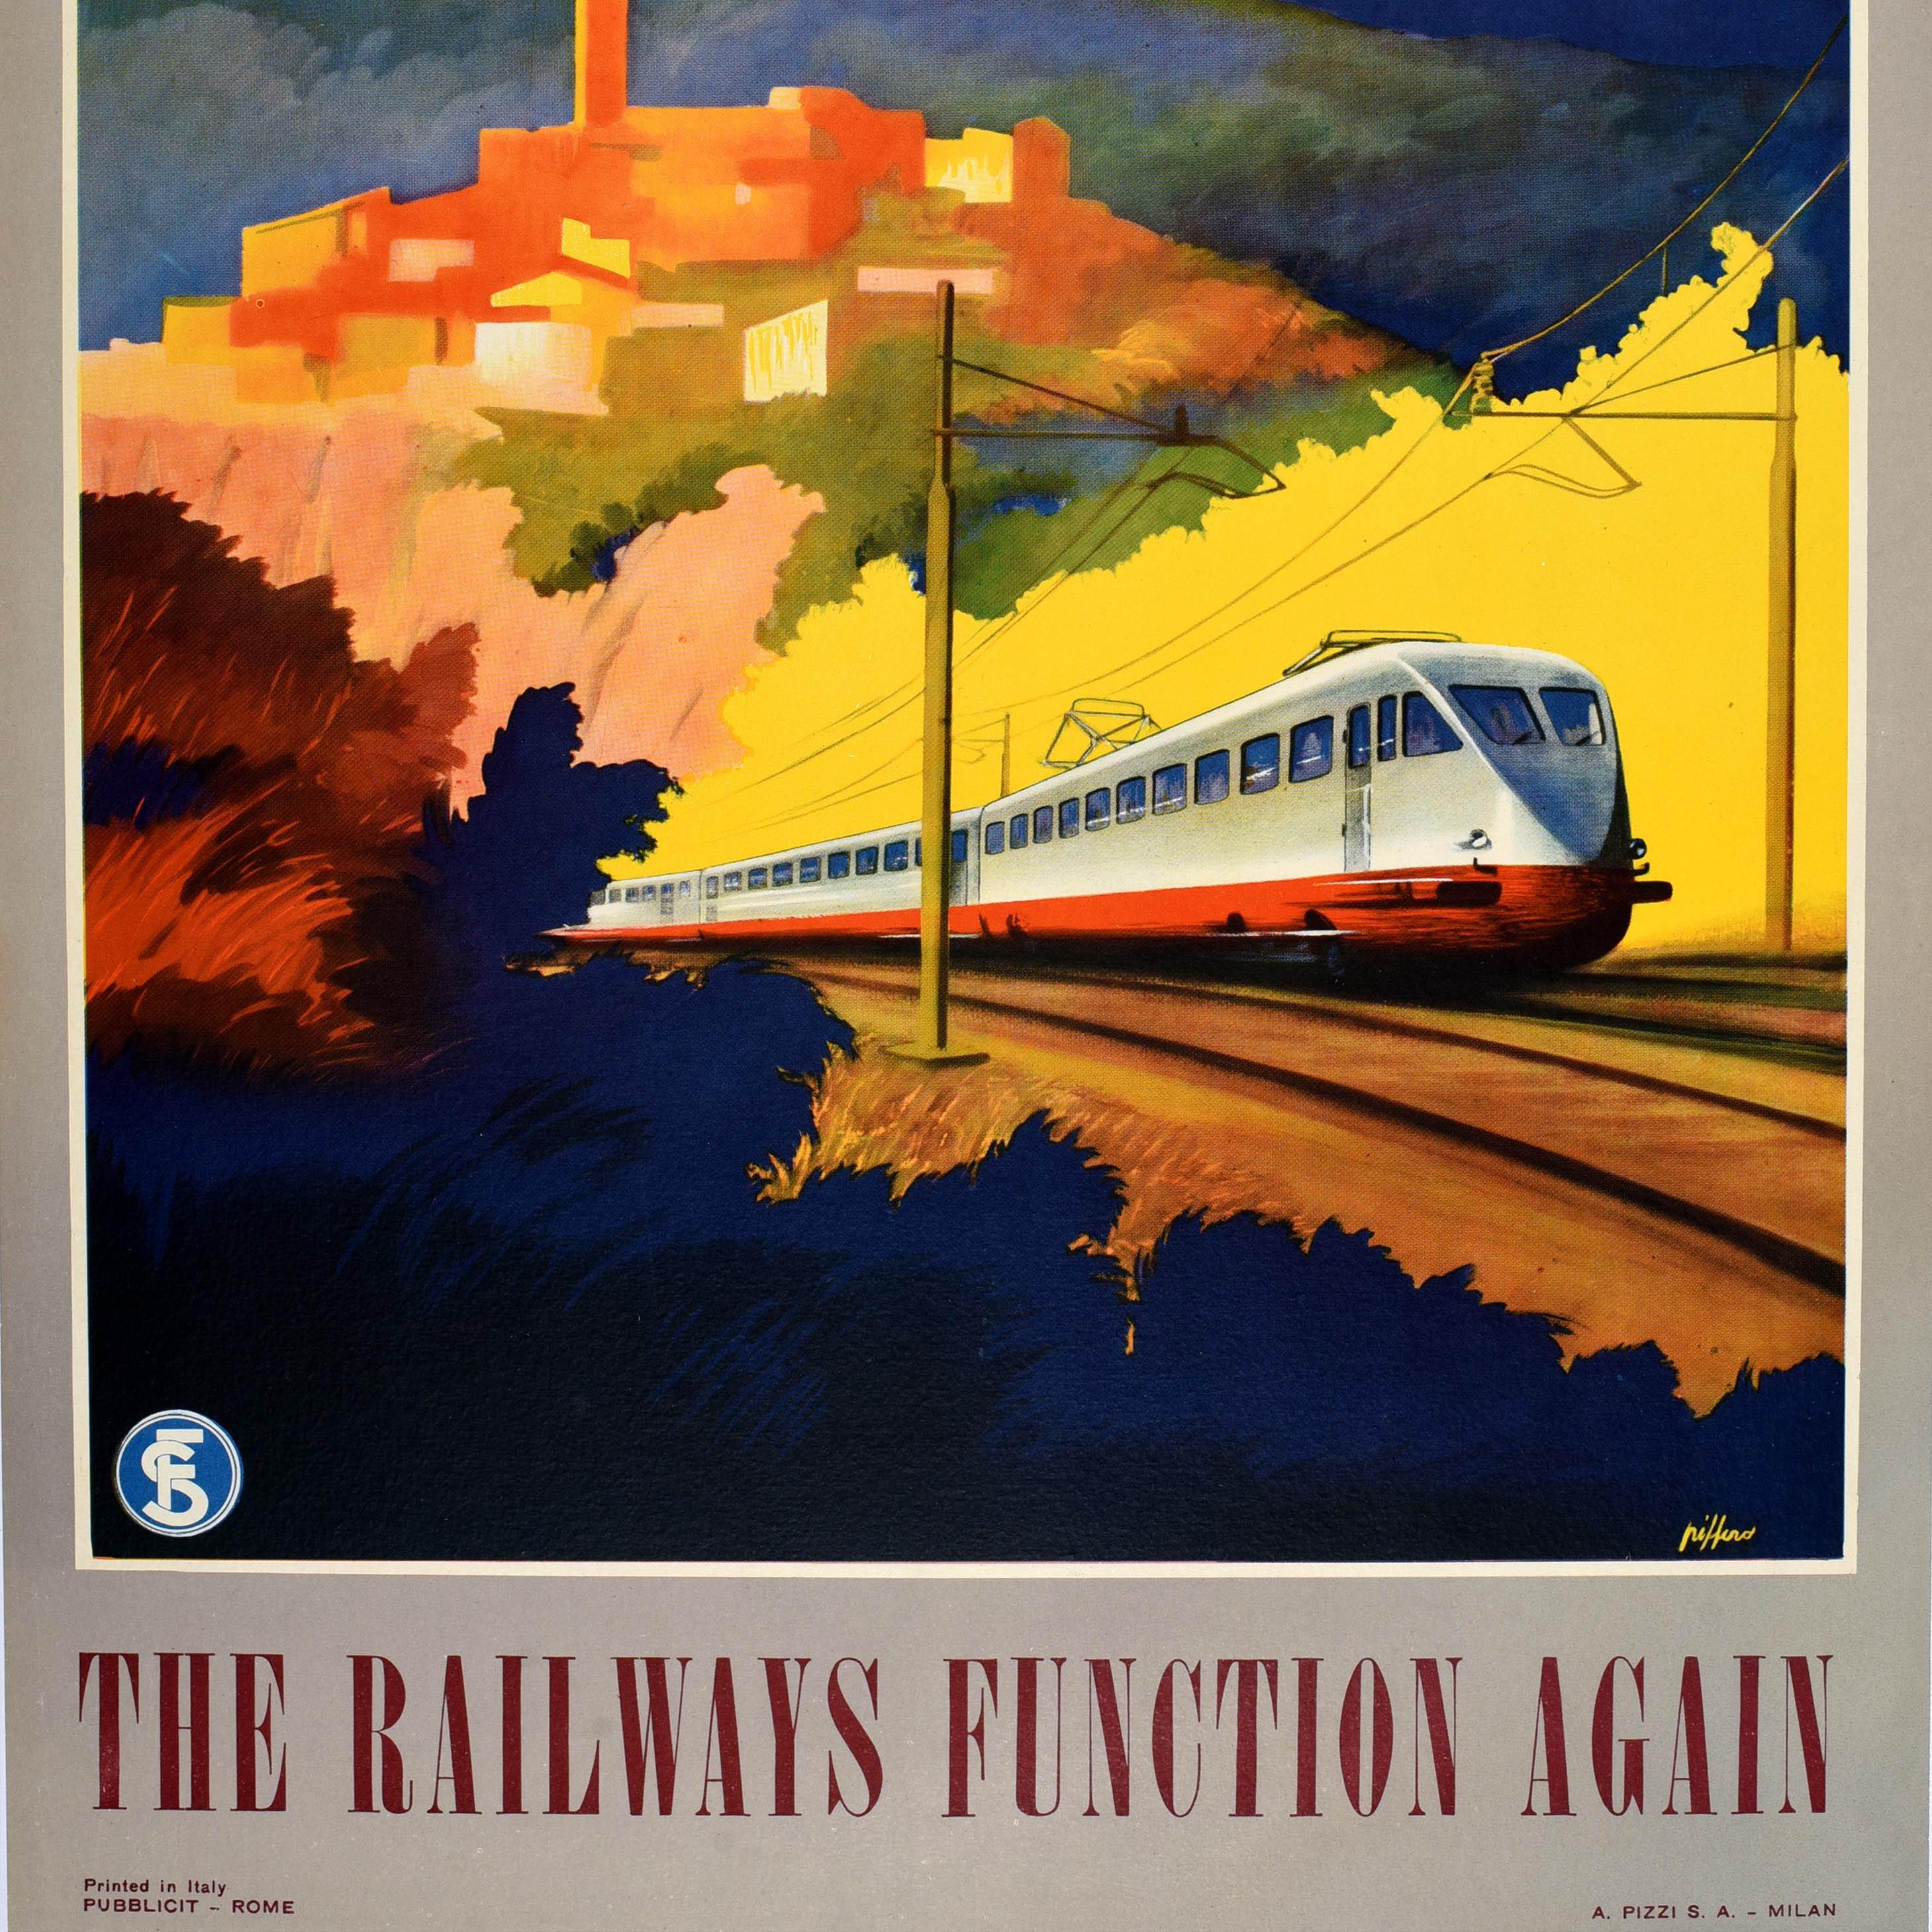 Original Vintage Train Poster Travel Italy Italian State Railways Function Again For Sale 1